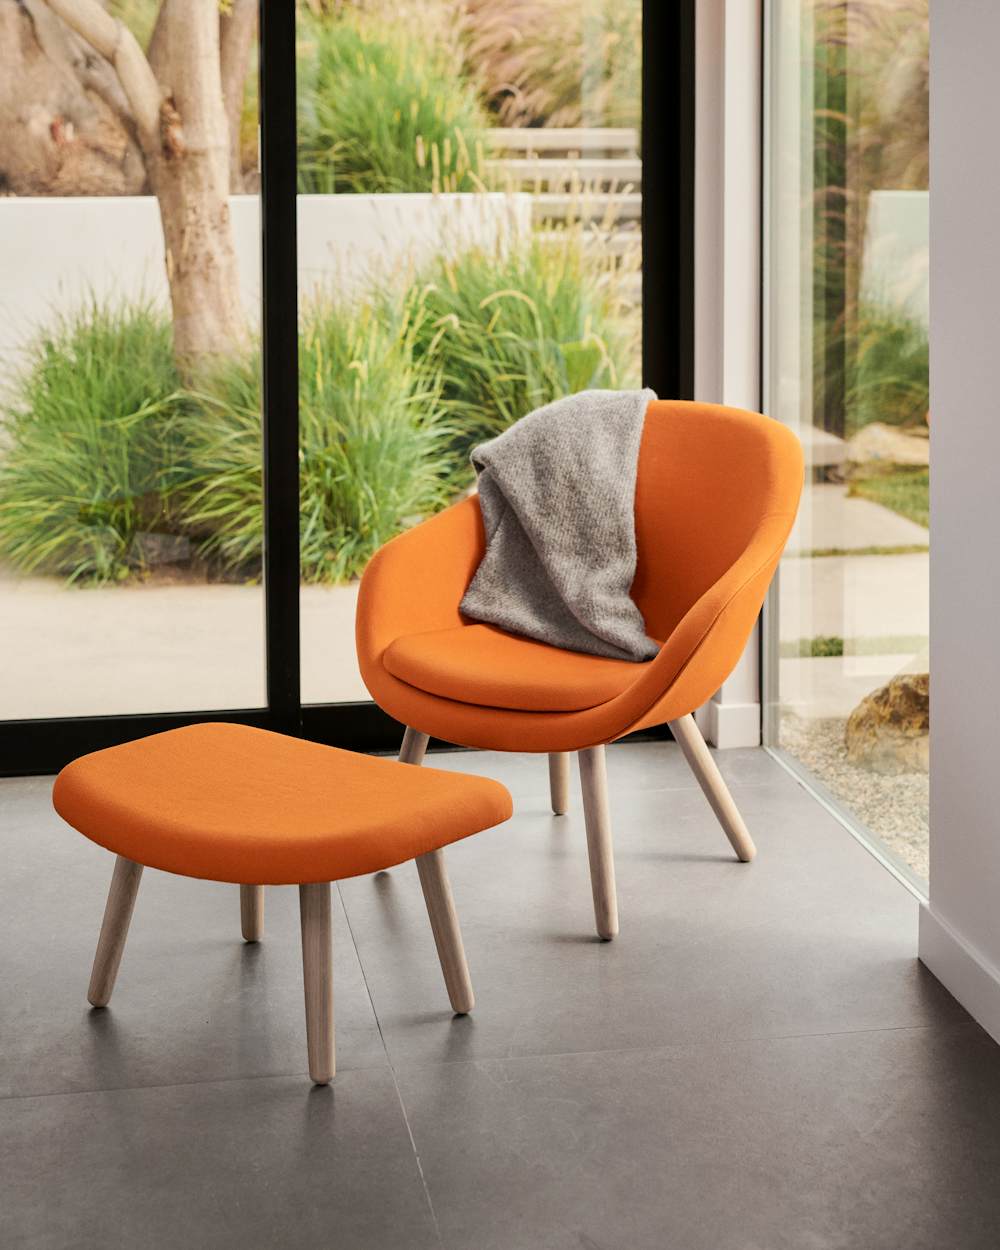 About A Lounge 82 Armchair in a sunroom setting